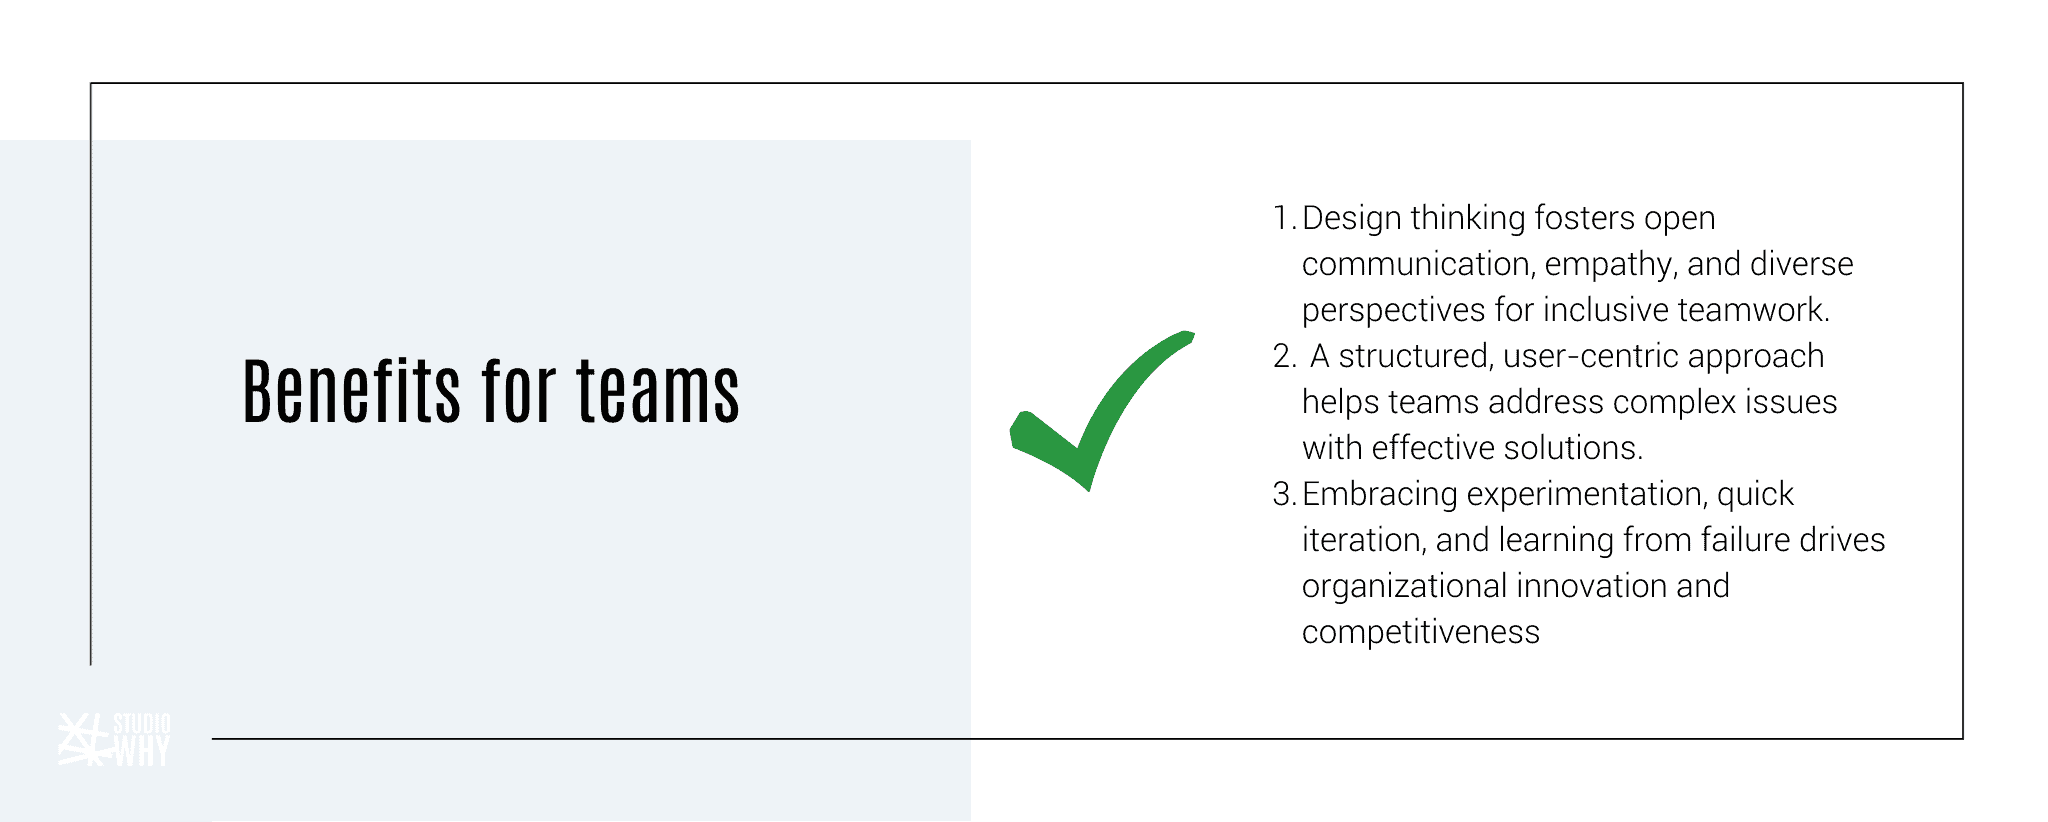 benefits design thinking for teams